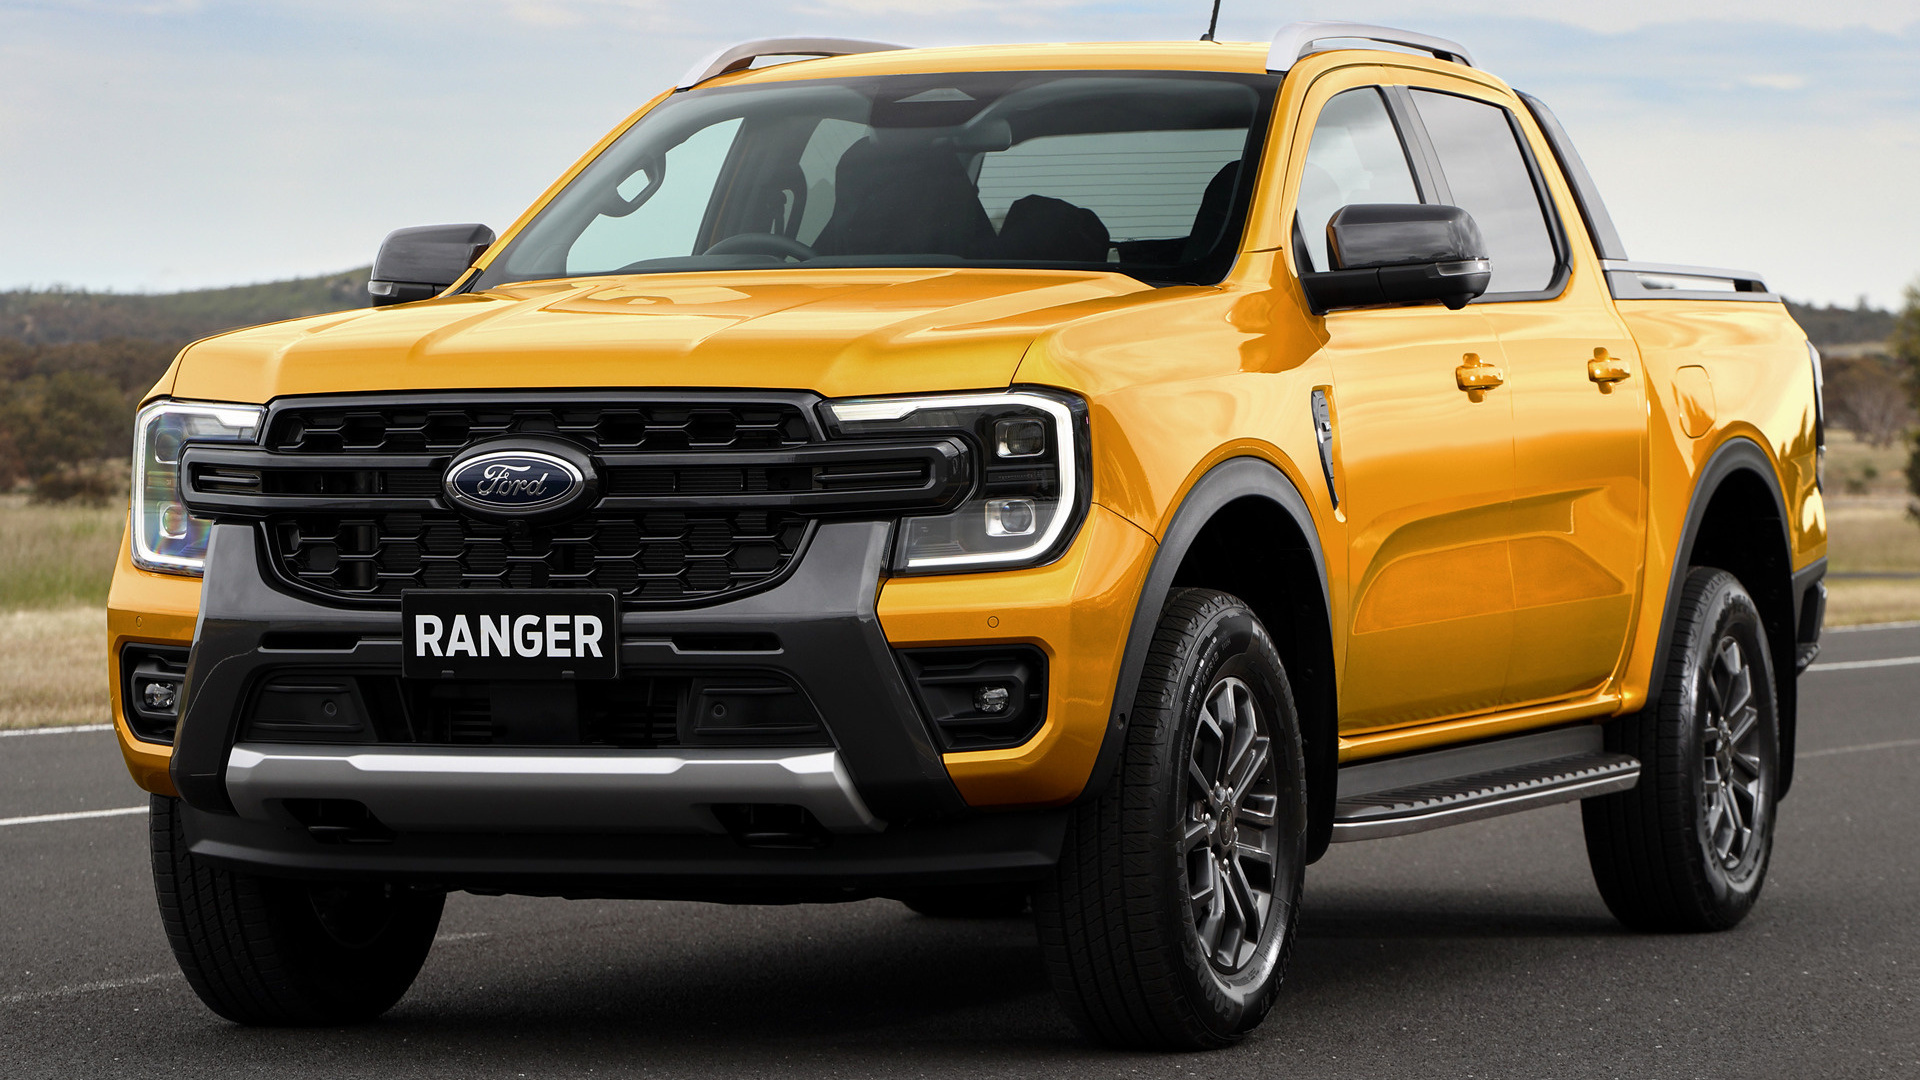 Ford Ranger: 2022 Wildtrak Double Cab, powered by a 2.3-liter EcoBoost four-cylinder engine. 1920x1080 Full HD Background.